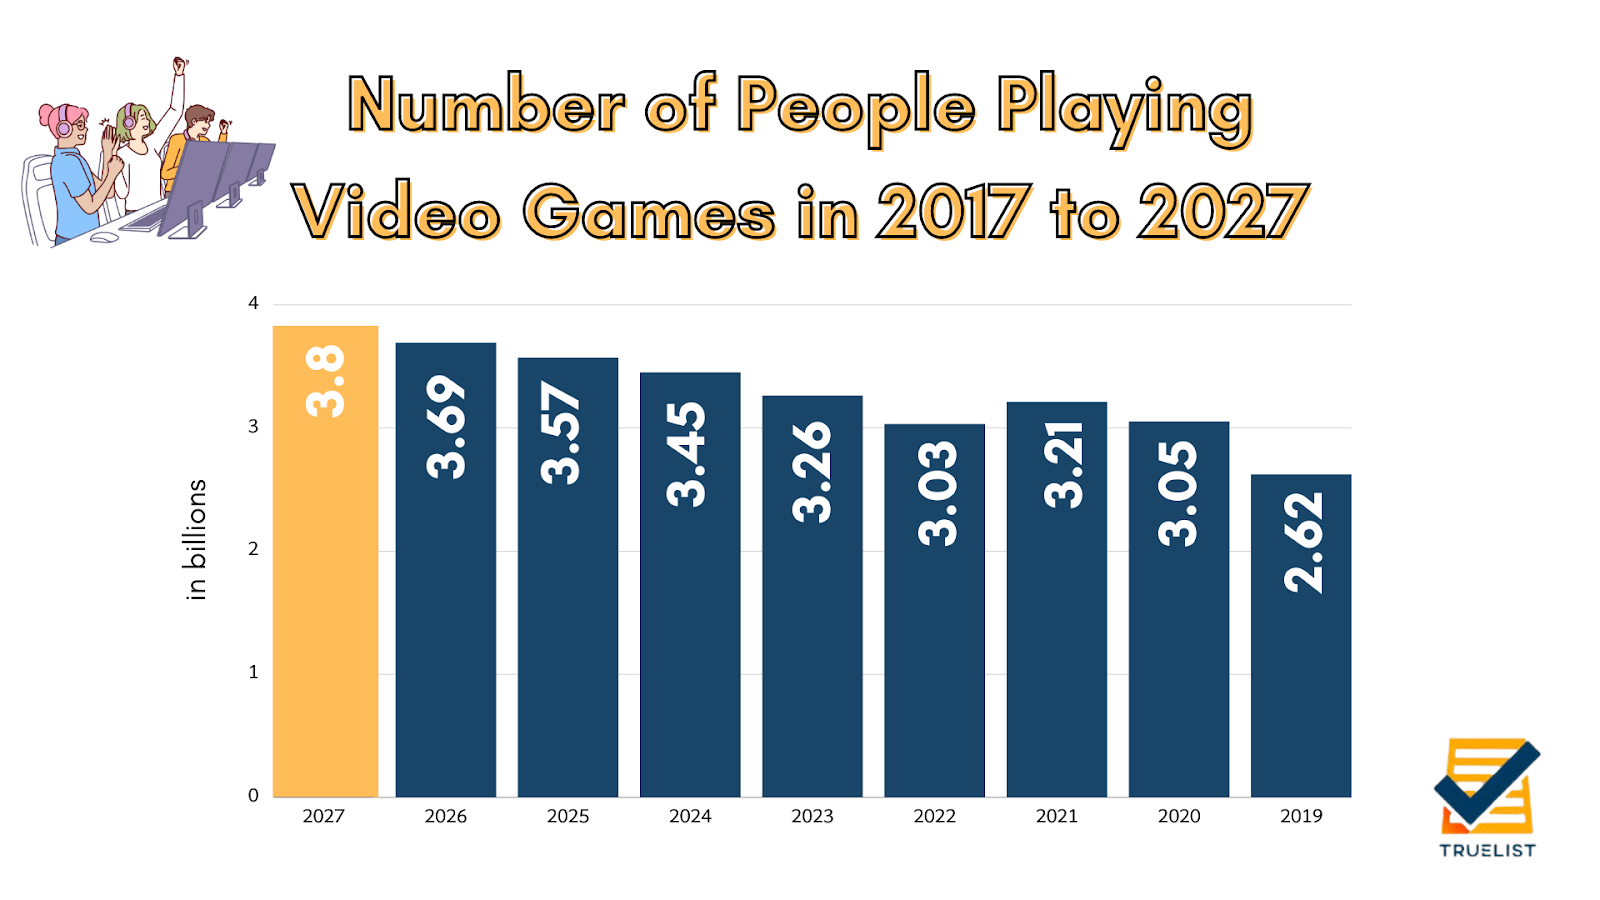 Infographic about the number of people playing video games